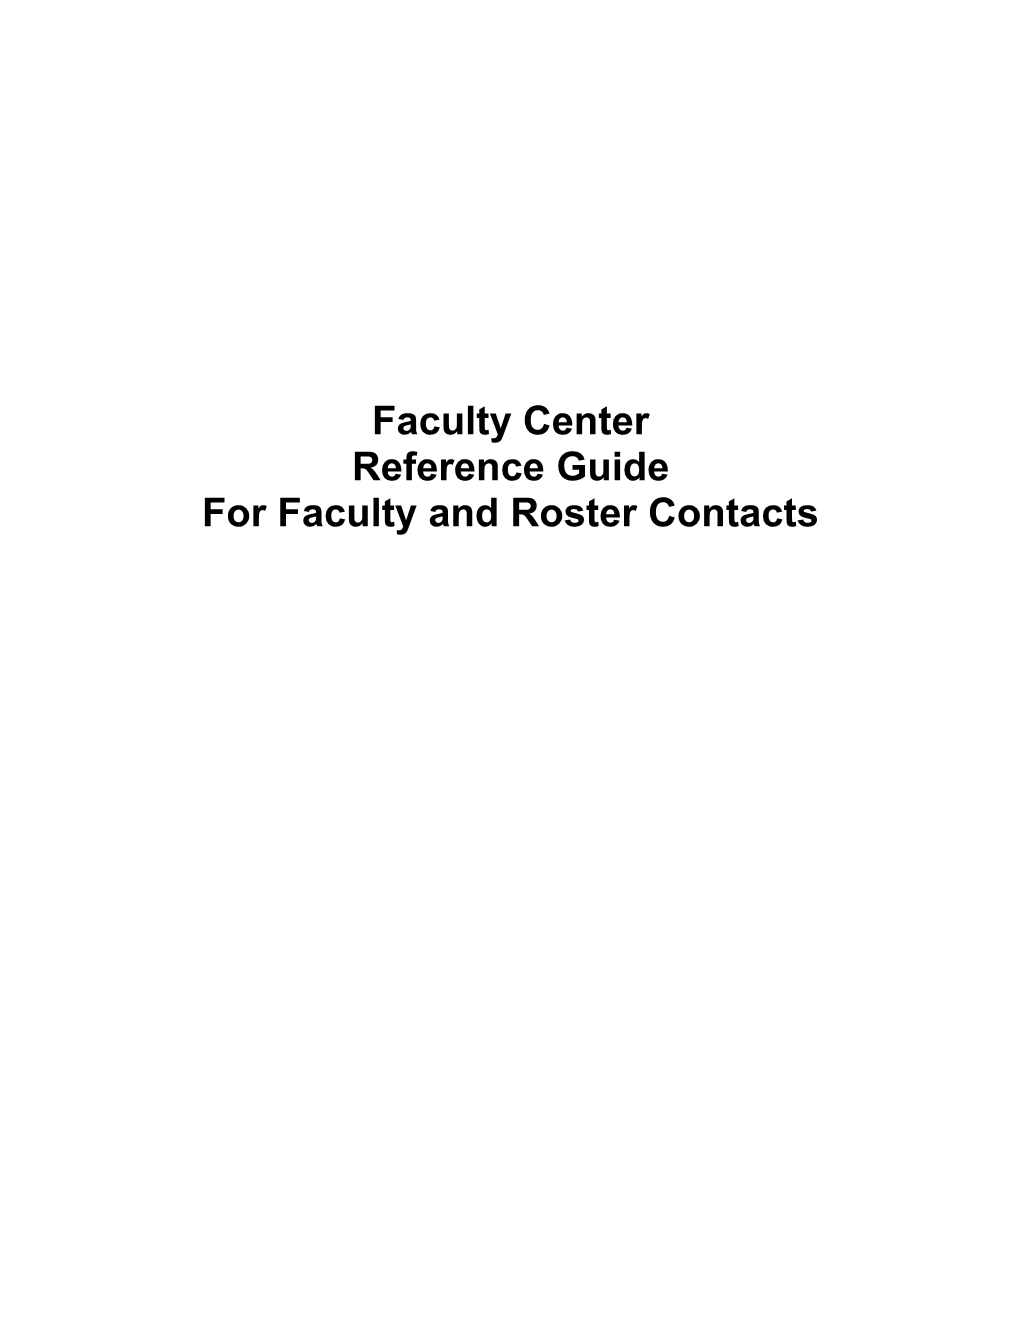 For Faculty and Roster Contacts